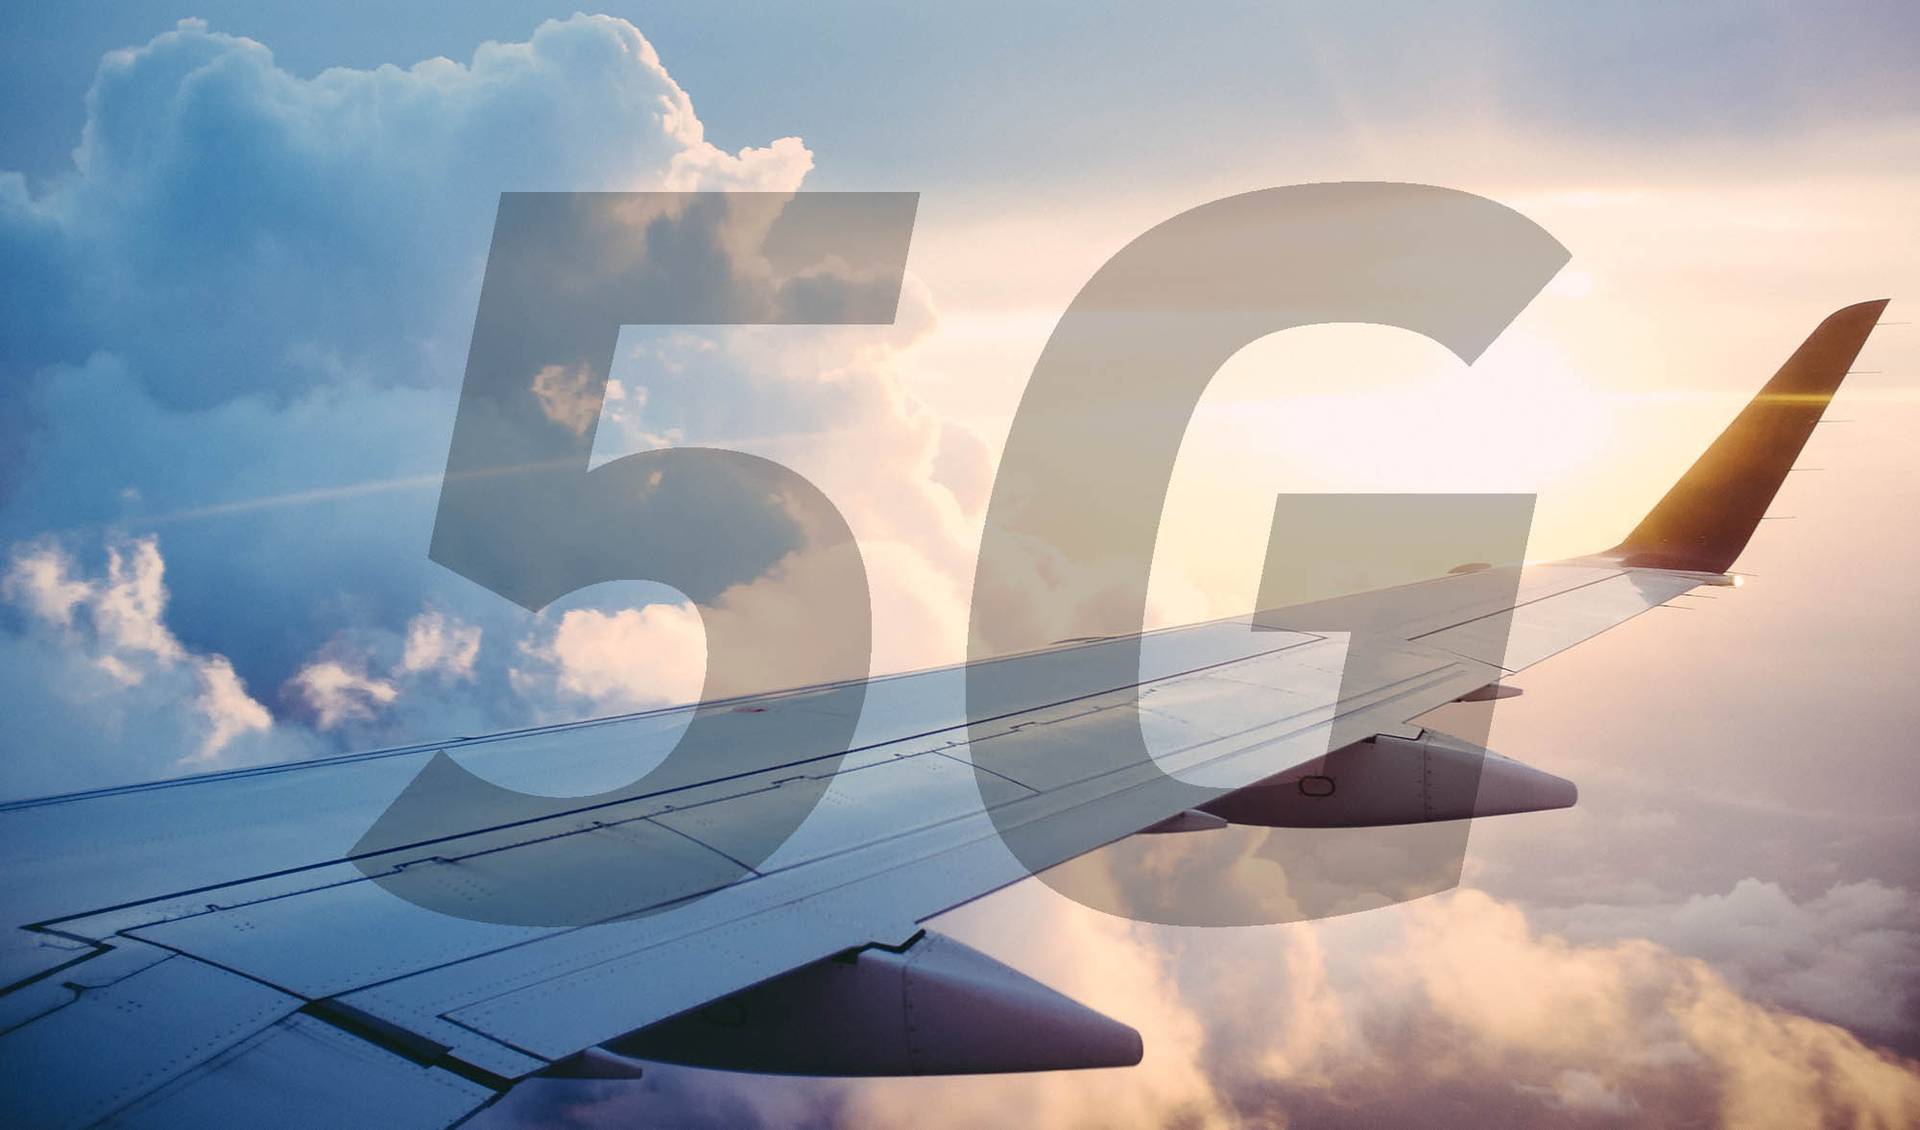 All passengers flying Verizon and AT&T to C-band 5G, your arrival's been delayed due to aircraft interference